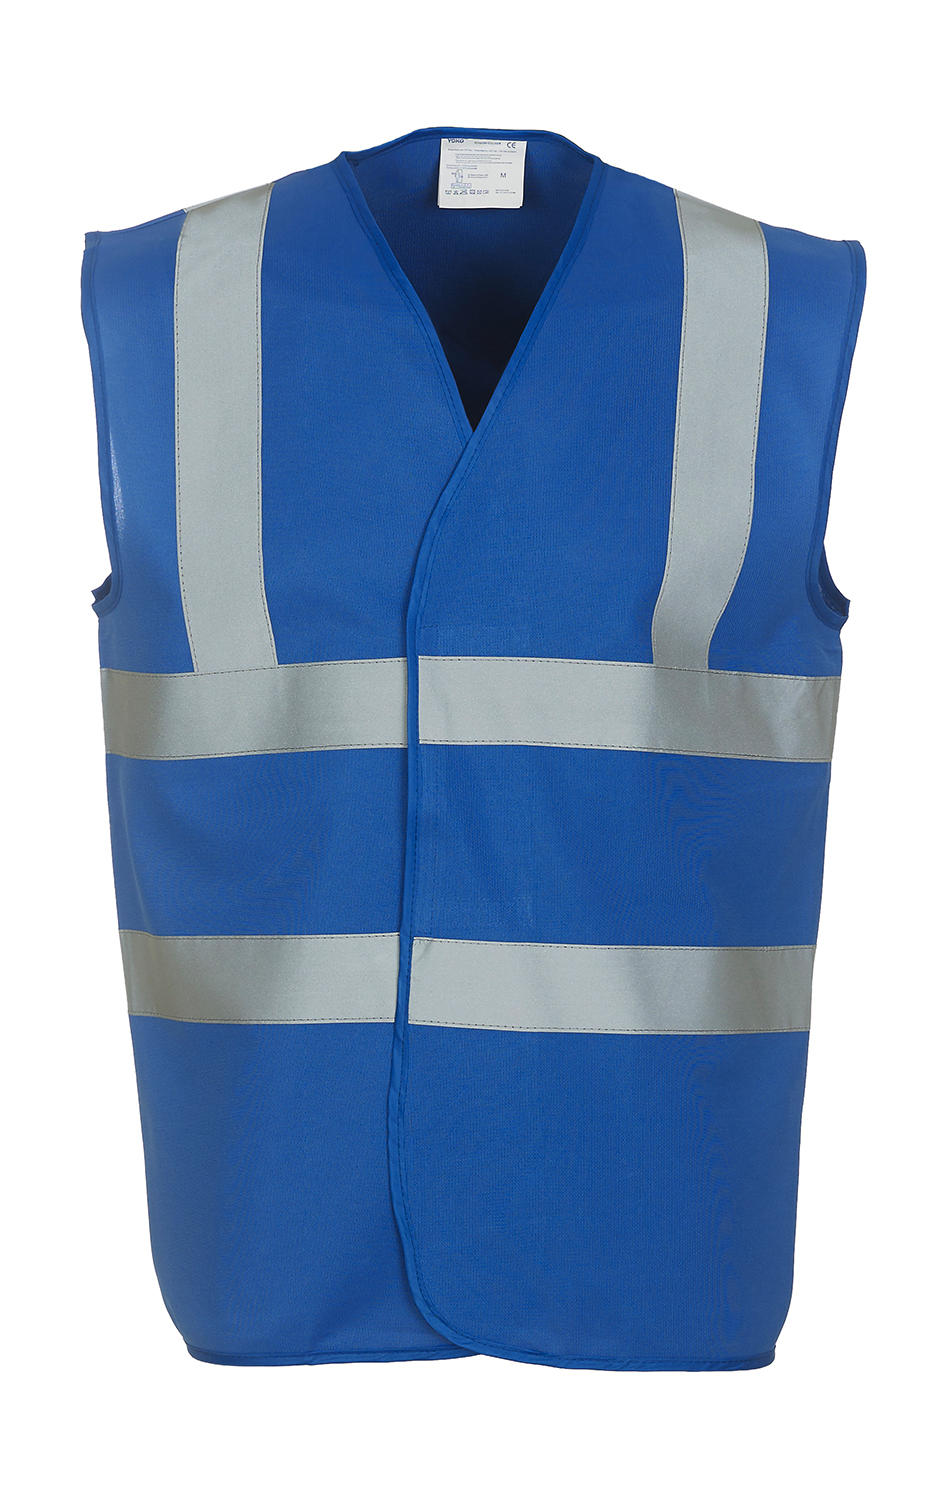  Fluo 2 Band+Brace Waistcoat in Farbe Royal Blue